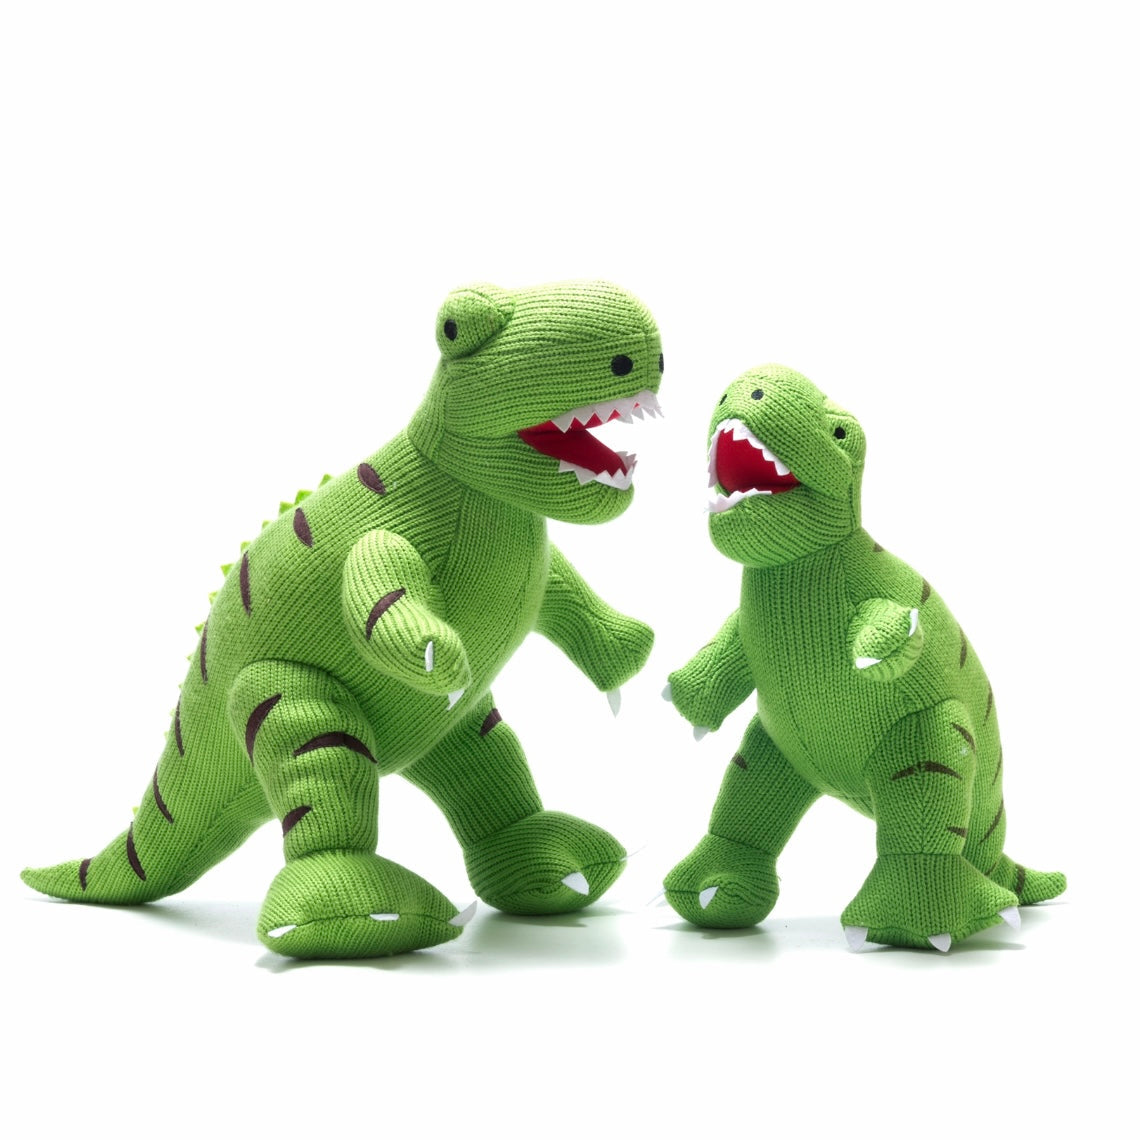 Large T-Rex Knitted Dinosaur Soft Toy